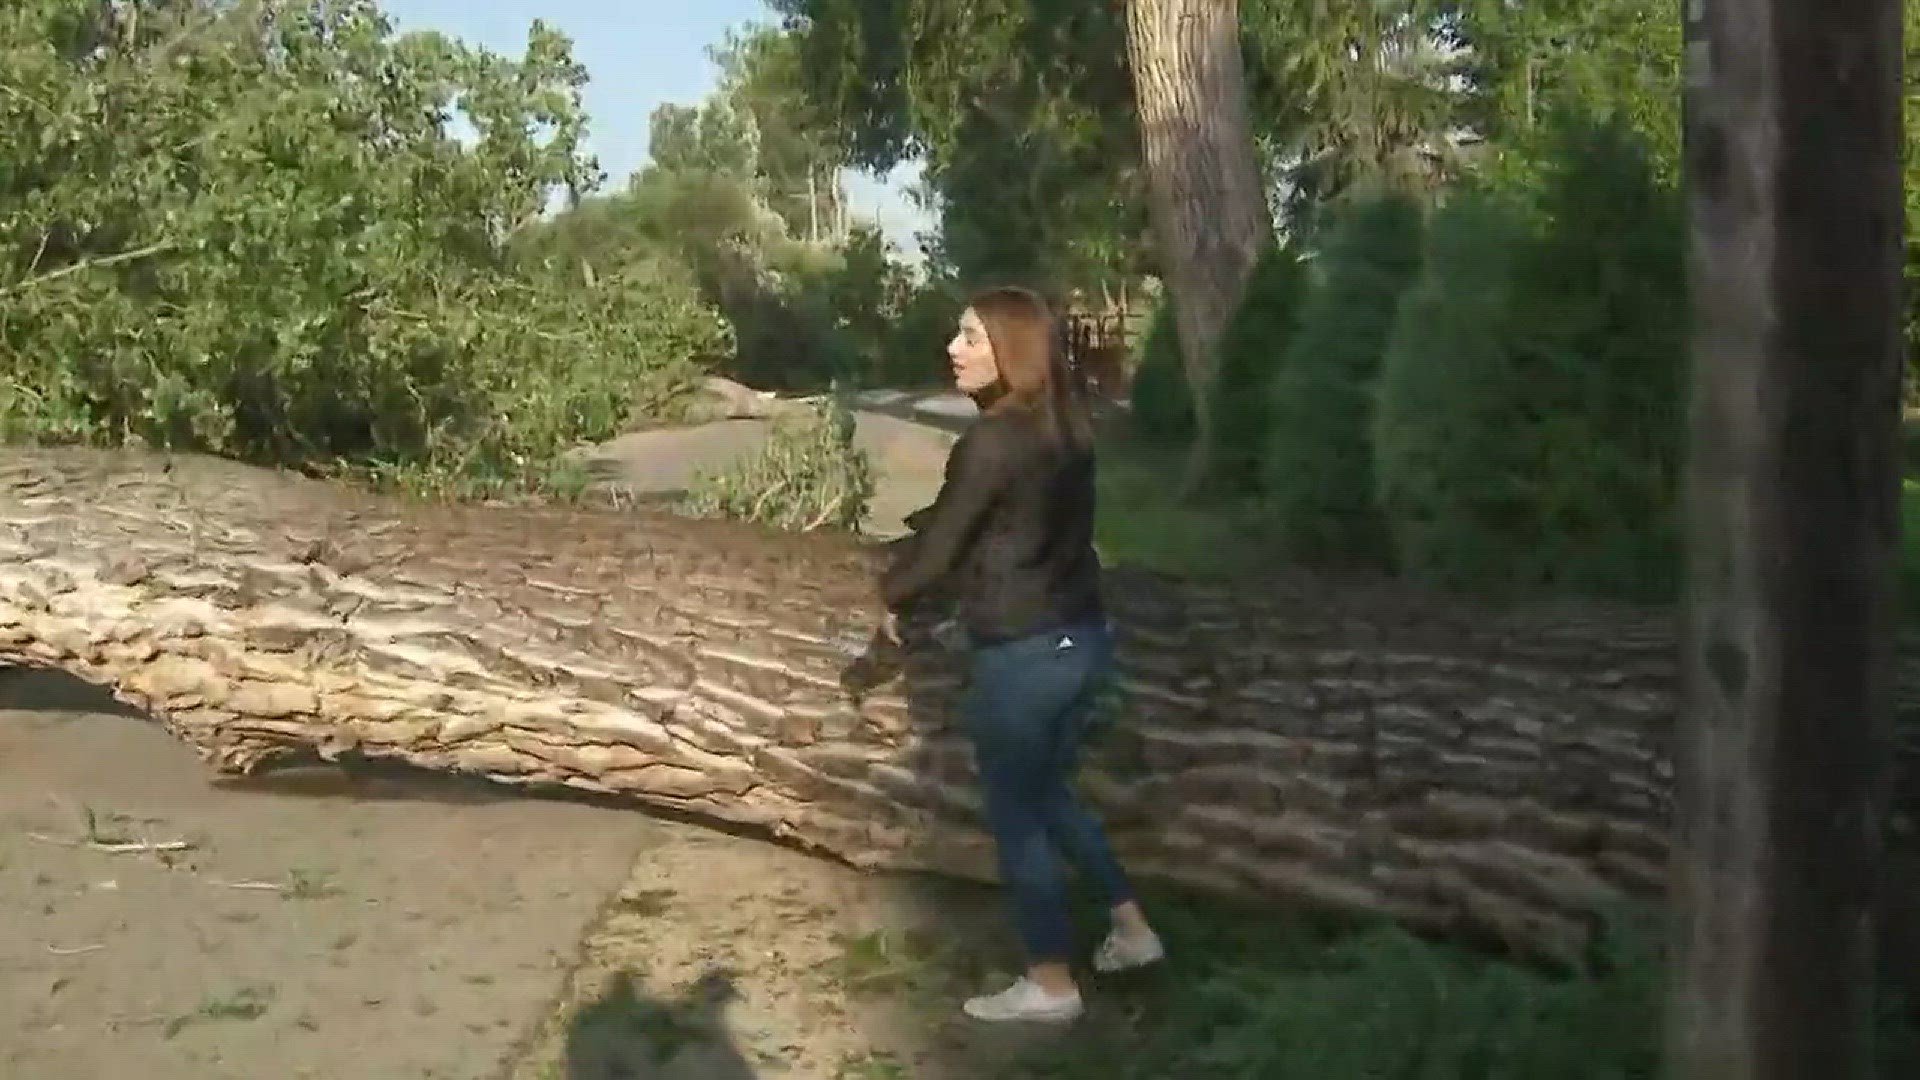 Sunday's possible tornado uprooted large trees in Brush